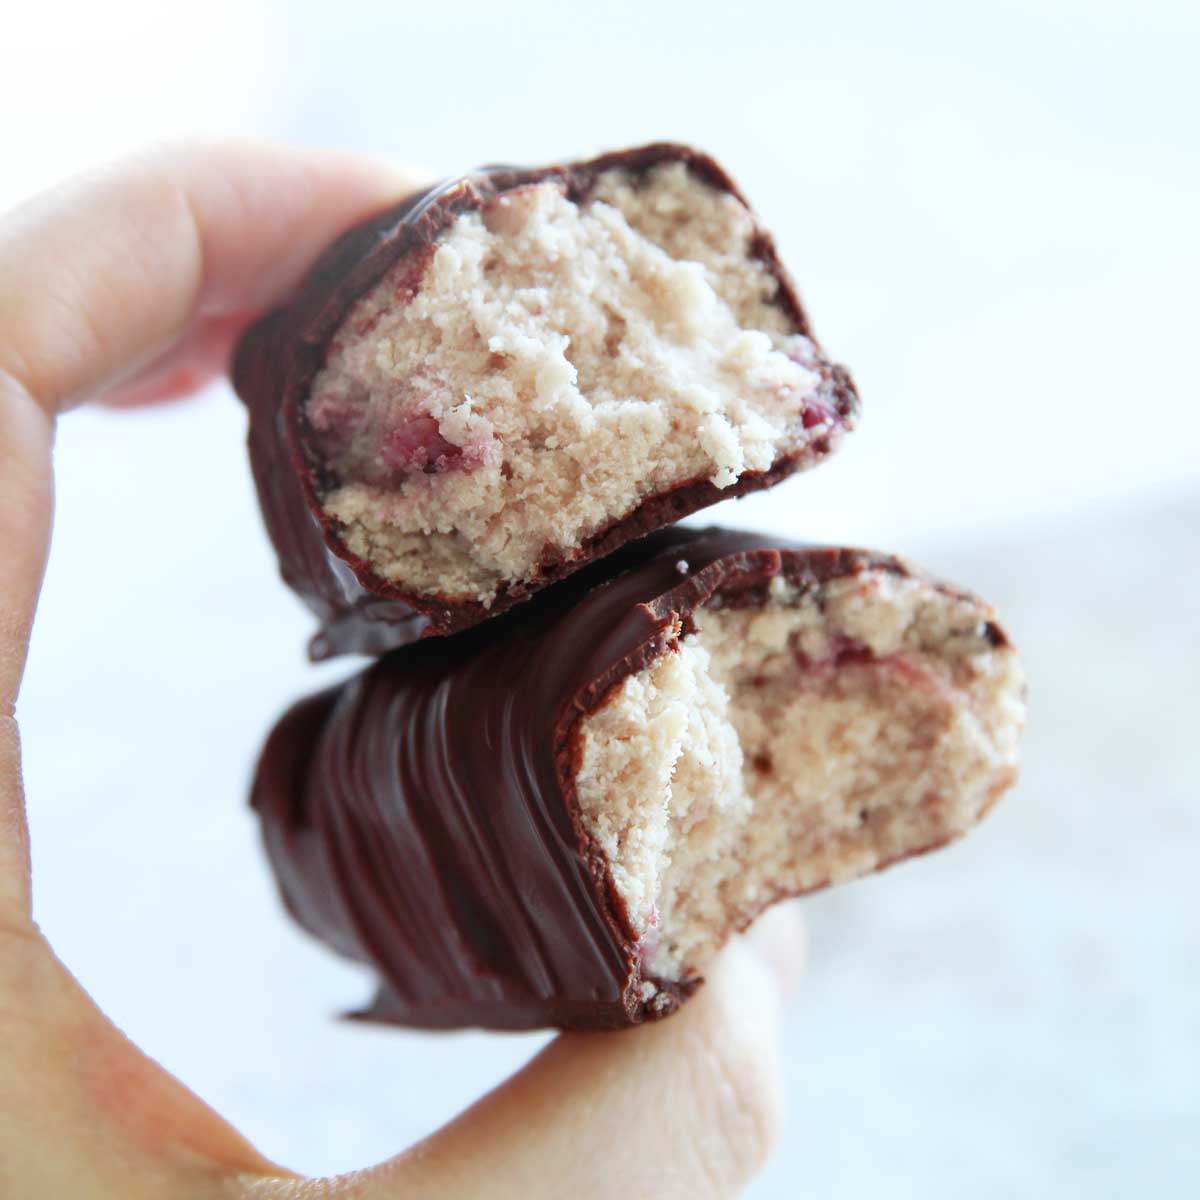 Keto Chocolate Covered Strawberries (Low Carb, Low Calories) - chocolate bars